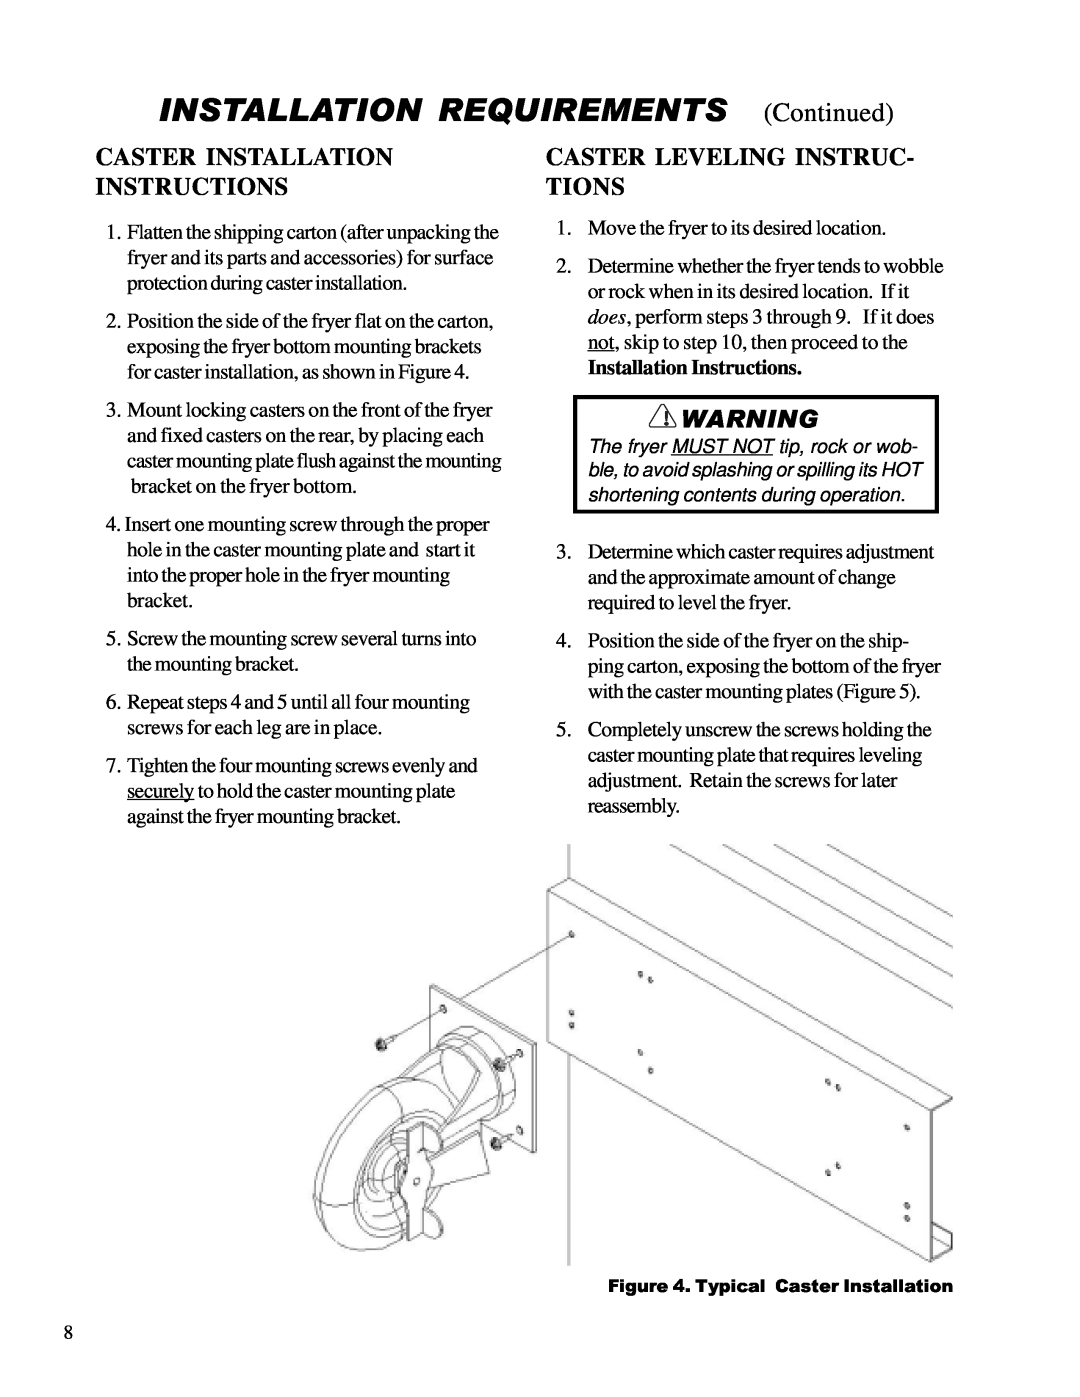 Anetsberger Brothers 14VFS warranty Caster Installation Instructions, Caster Leveling Instruc- Tions 